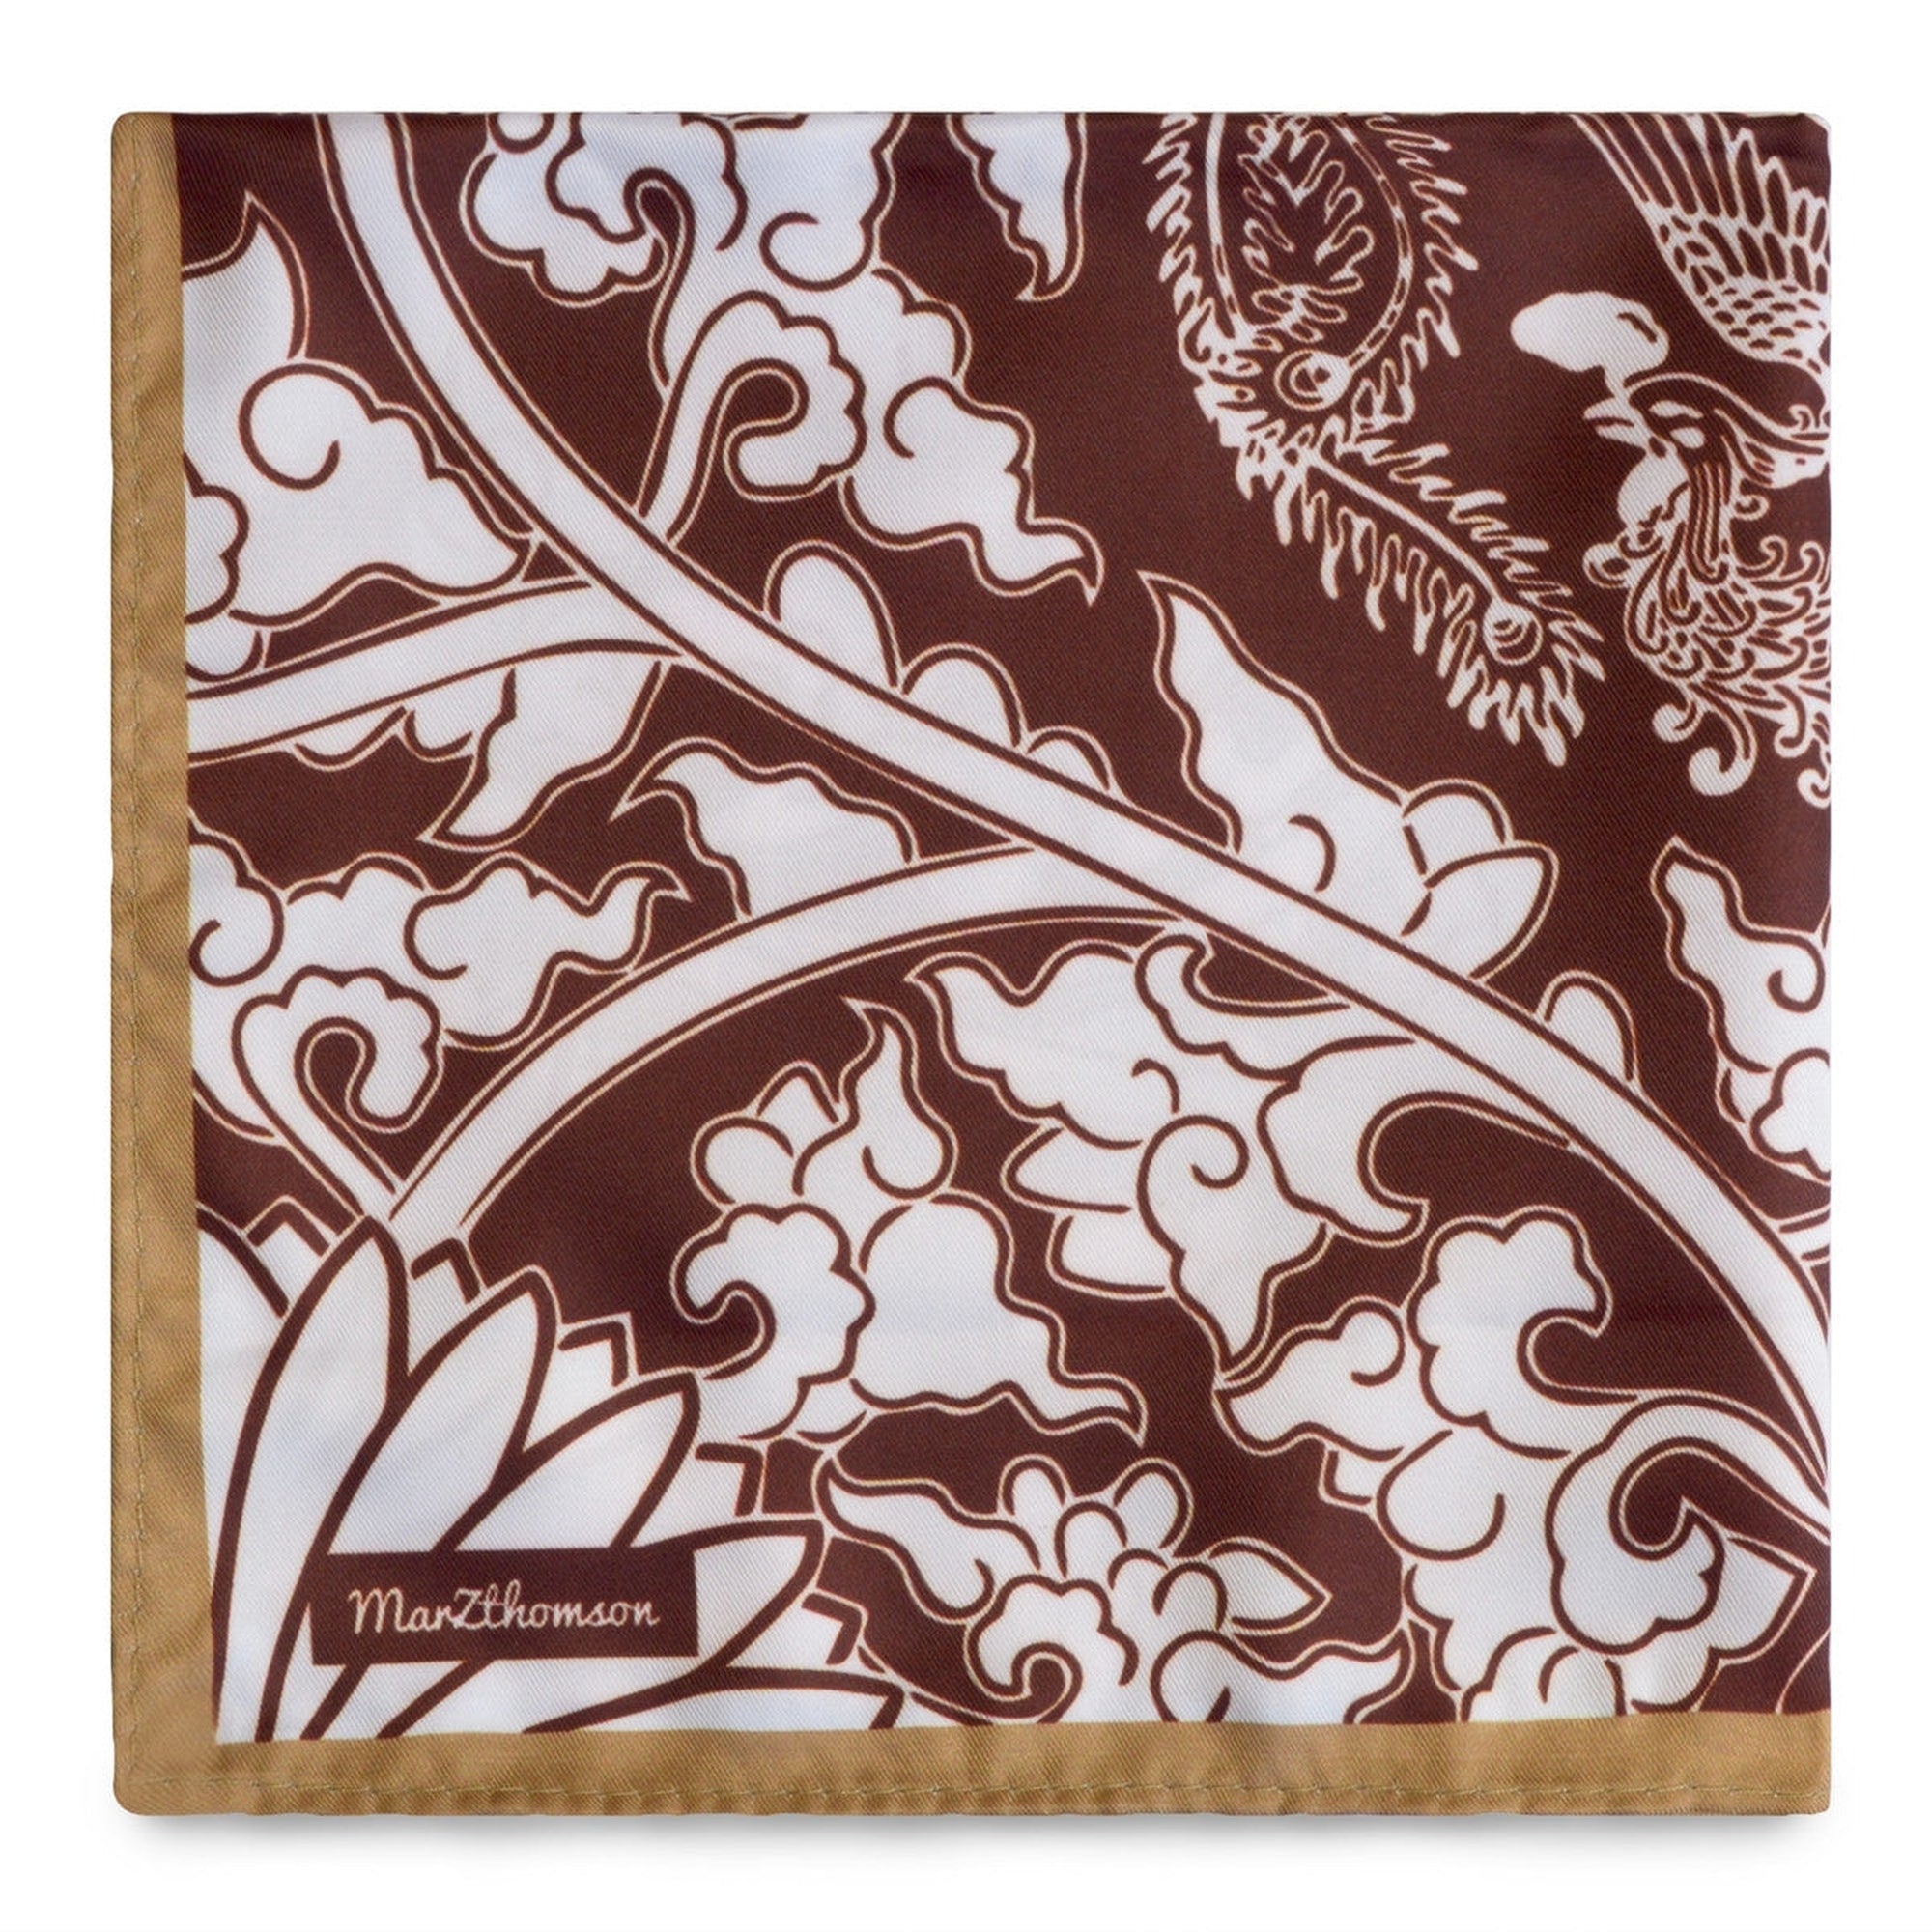 Peranakan Floral Print Pocket Square in Brown and Tan Trimming-Pocket Squares-MarZthomson-Cufflinks.com.sg